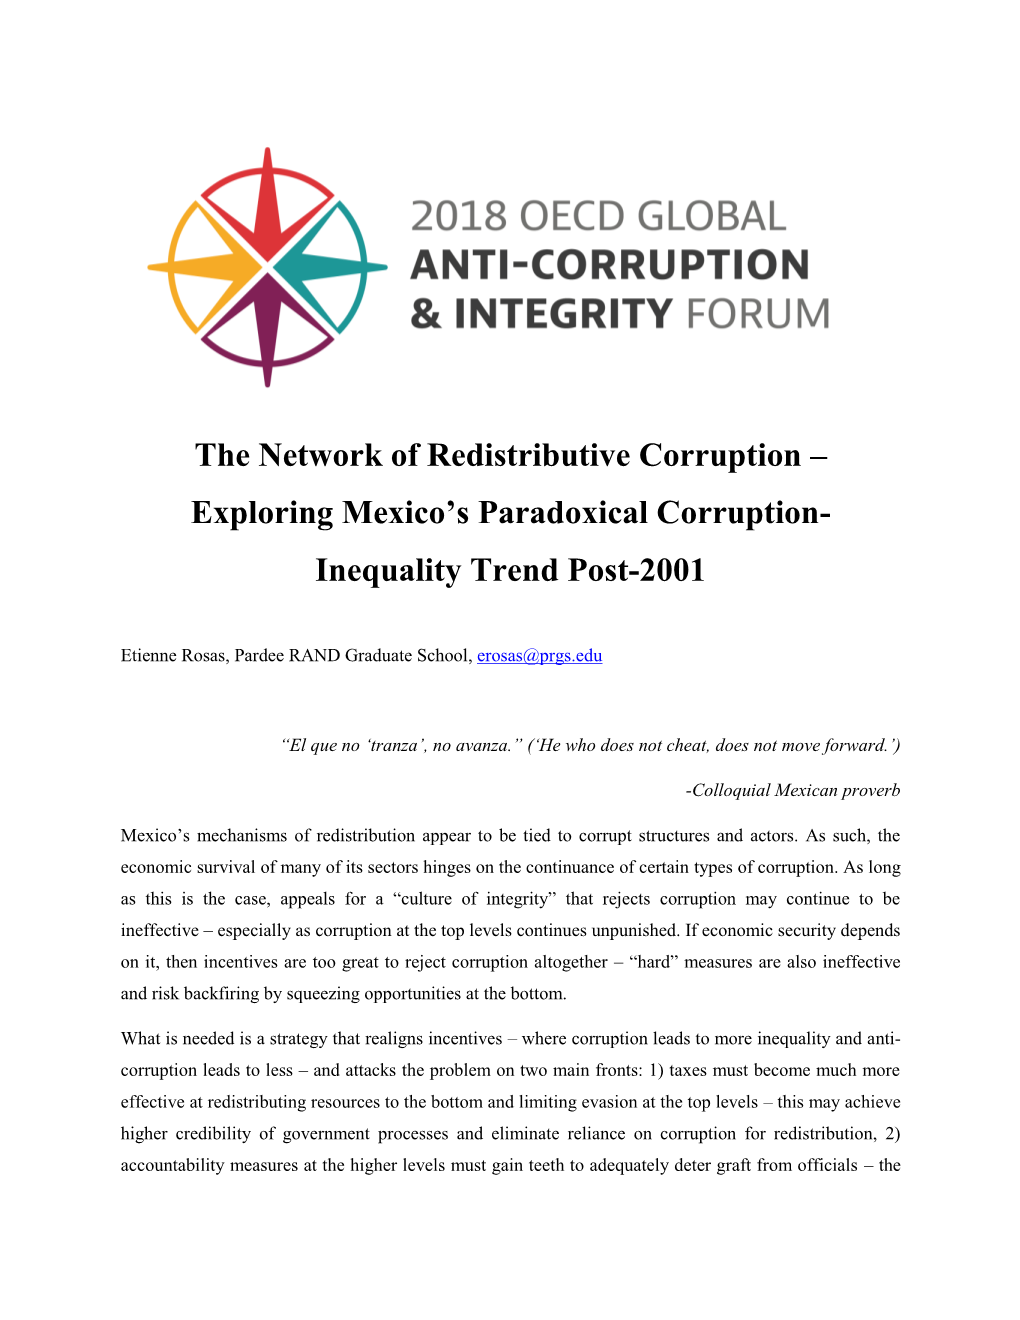 The Network of Redistributive Corruption – Exploring Mexico's